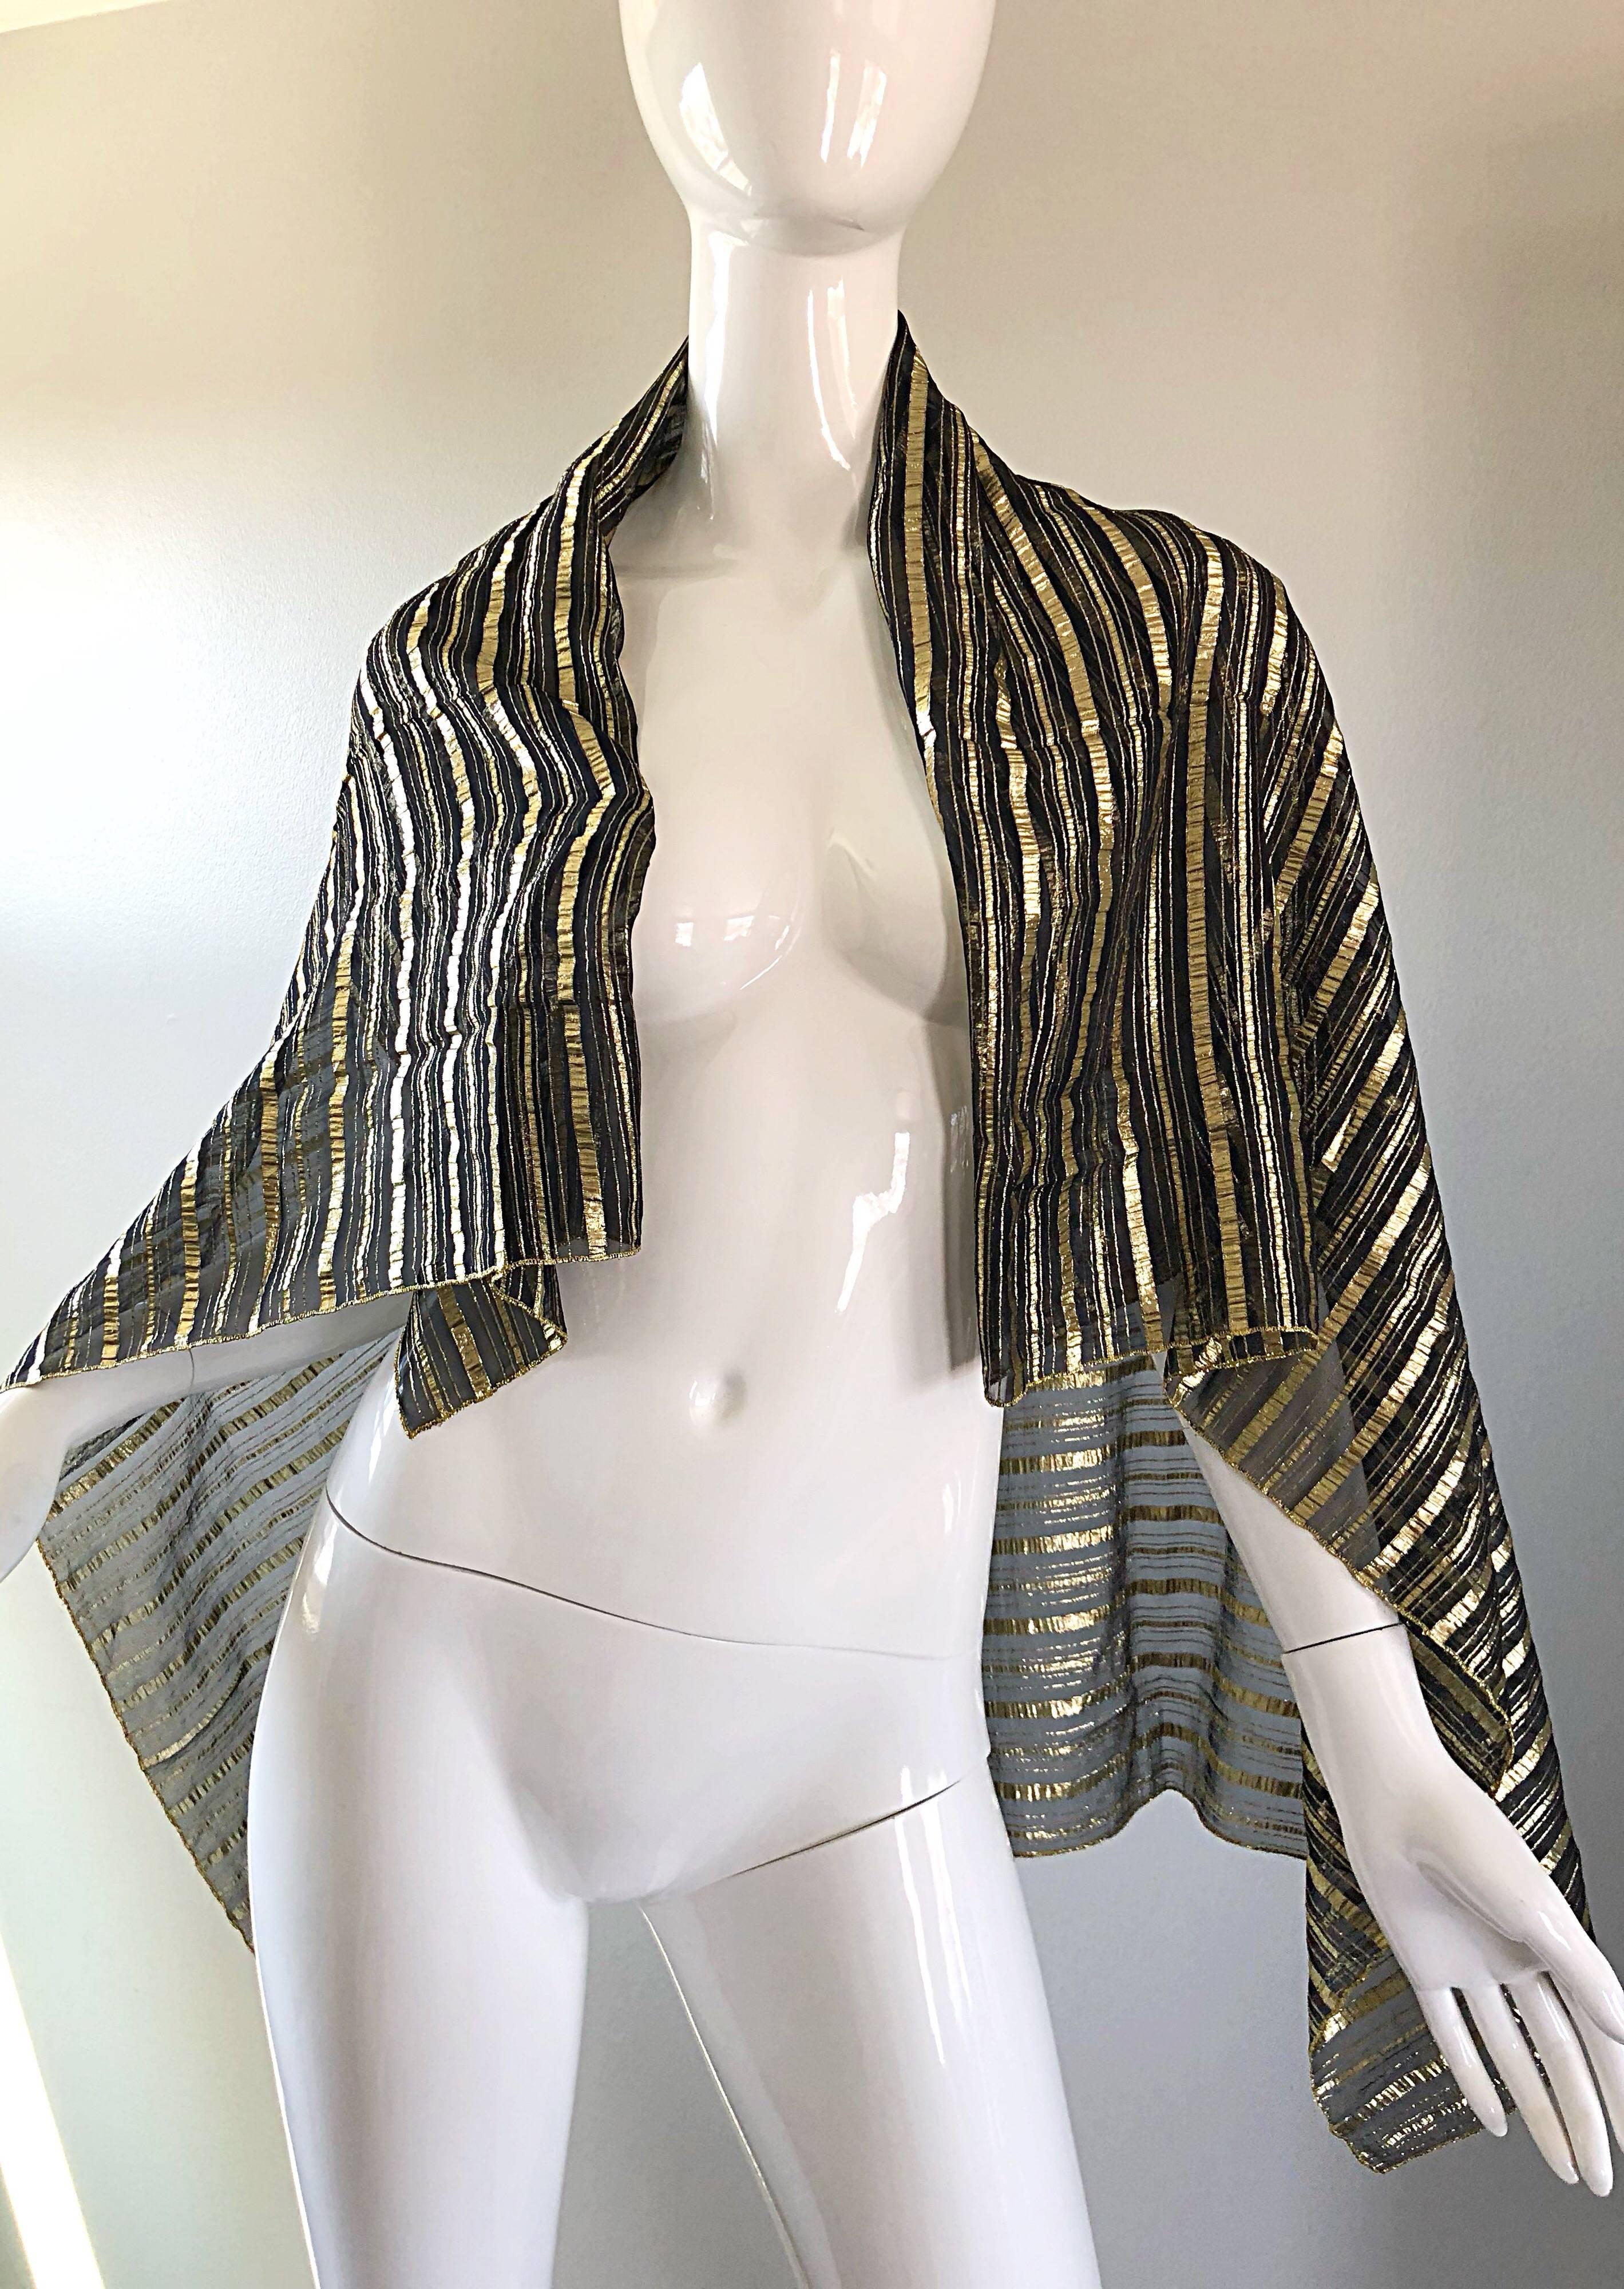 Beautiful vintage CHRISTIAN DIOR large gold and black silk metallic piano shawl scarf! Features gold and black metallic stripes throughout. Can be worn a number of different ways. Glamorous draped over the shoulders, or thrown over the neck. In